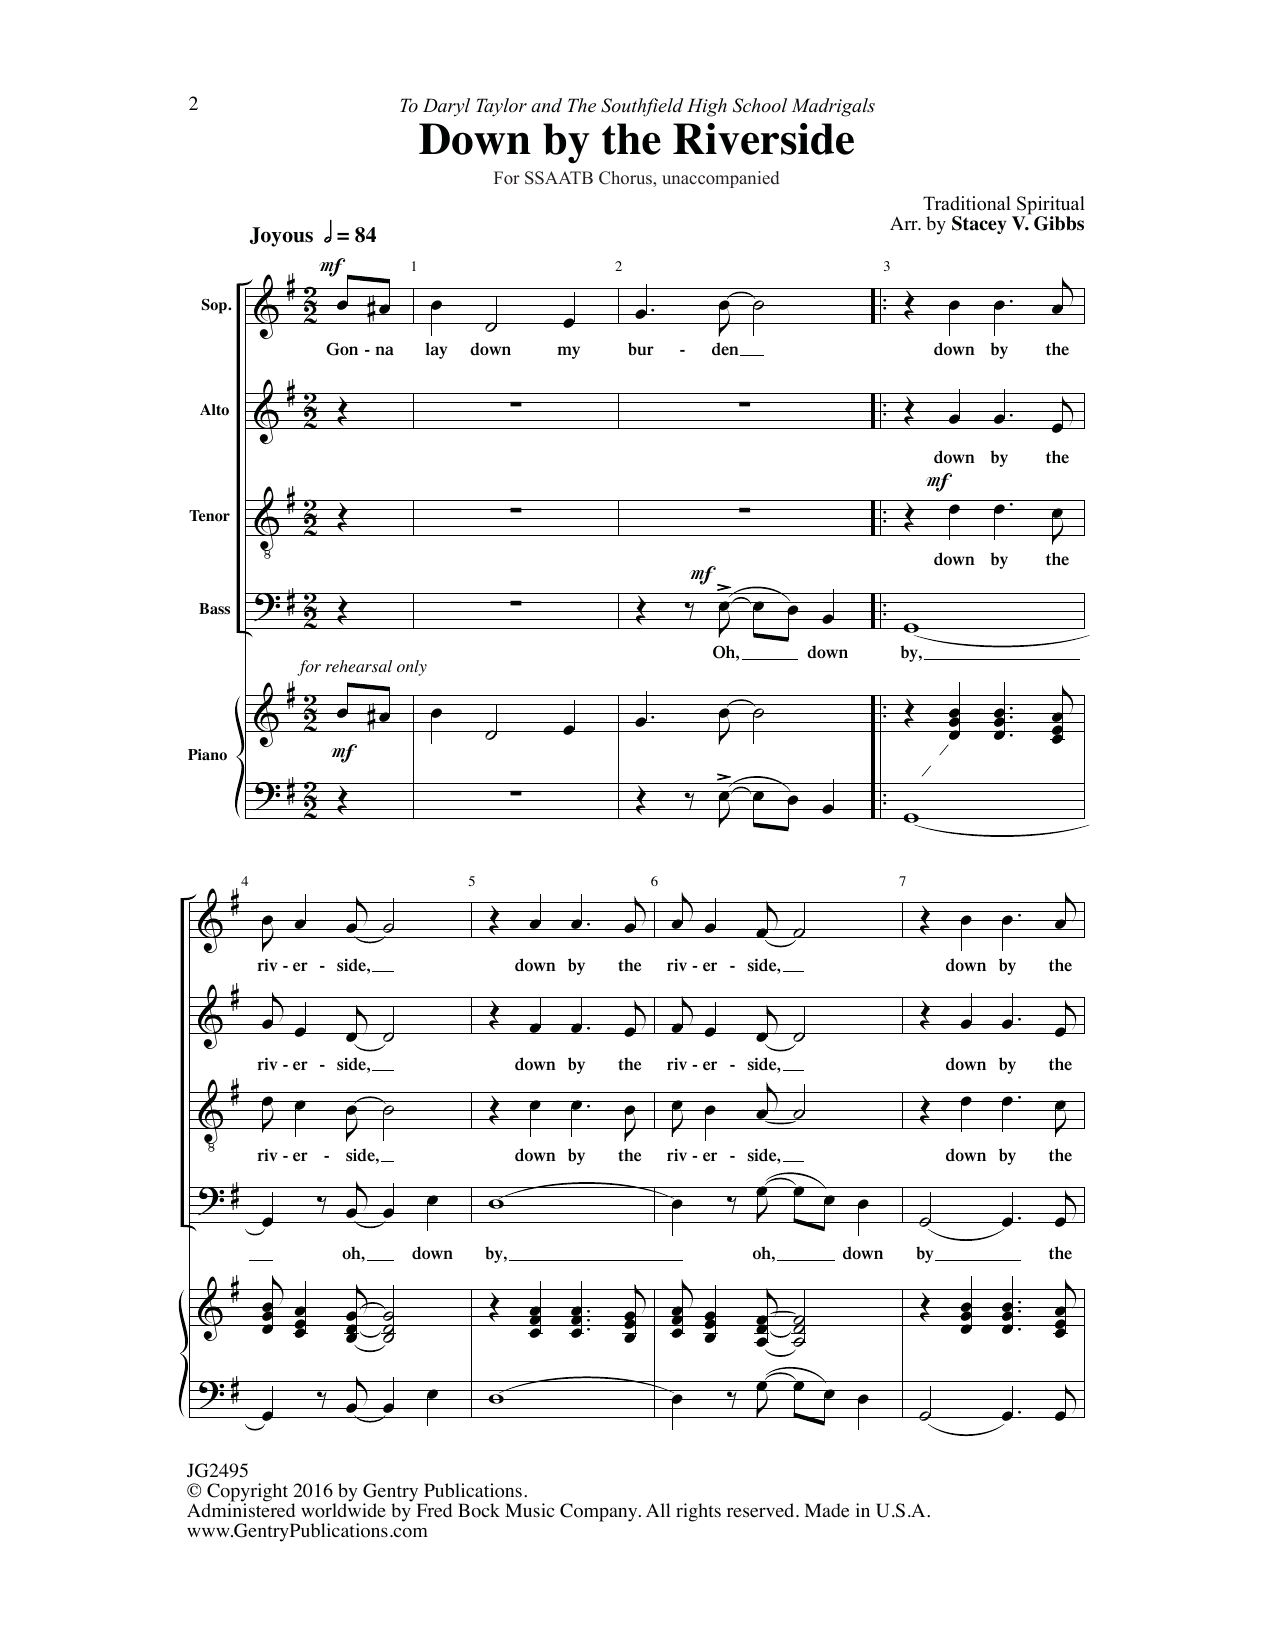 Download Stacy V. Gibbs Down by the Riverside Sheet Music